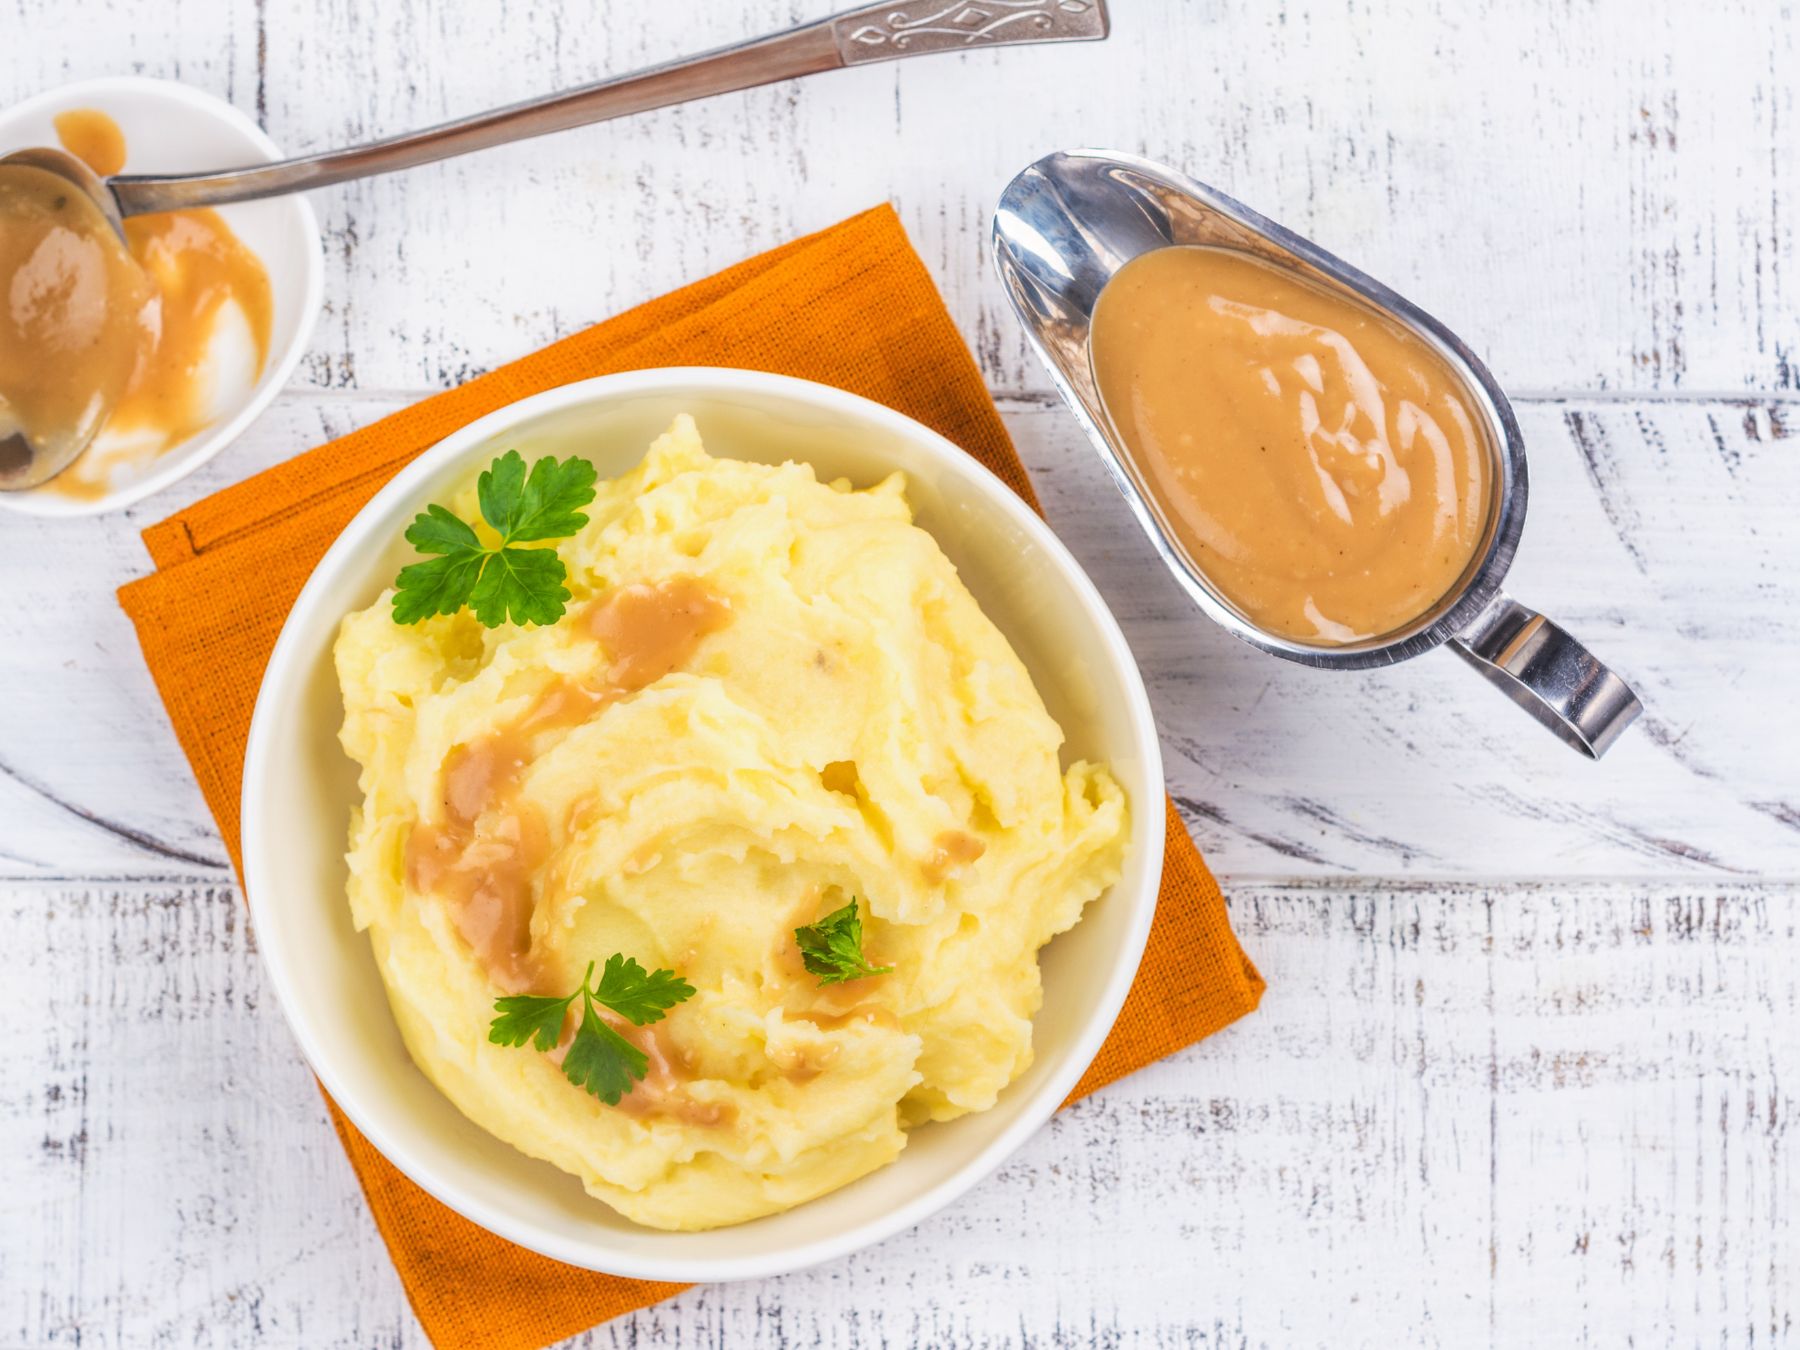 https://www.itsallaboutaip.com/wp-content/uploads/2023/12/Paleo-AIP-Mashed-White-Sweet-Potatoes-with-Brown-Gravy-3.jpg